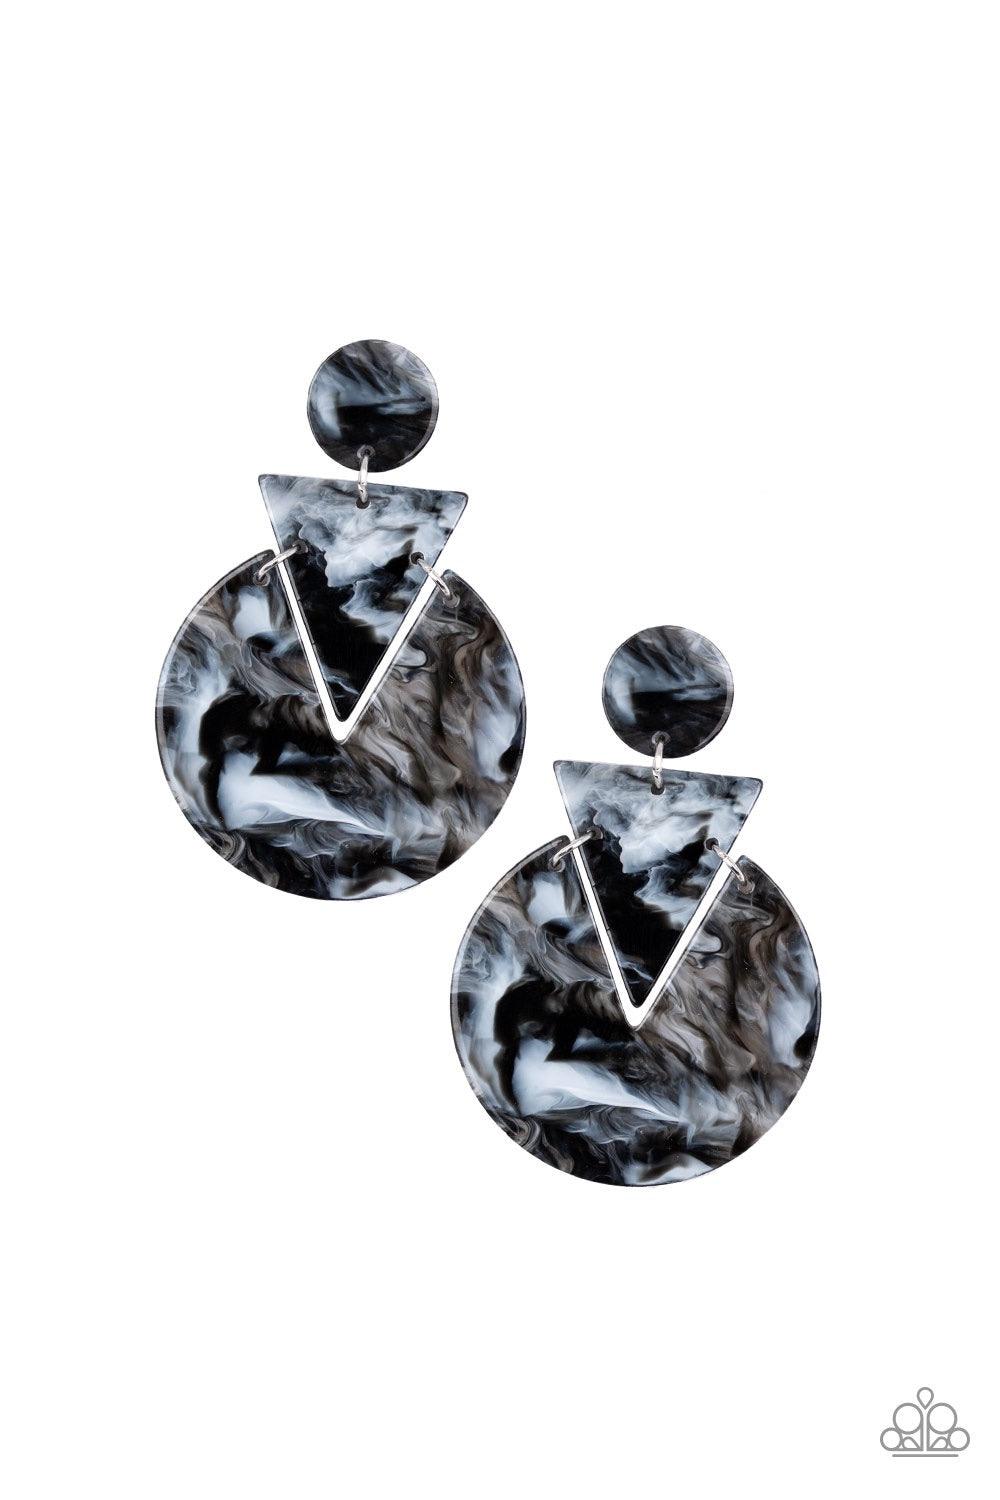 Paparazzi Accessories Head Under WATERCOLORS- Black Swirling with watercolor-like patterns, smoky acrylic frames connect into an abstract lure for a retro look. Earring attaches to a standard post fitting. Jewelry